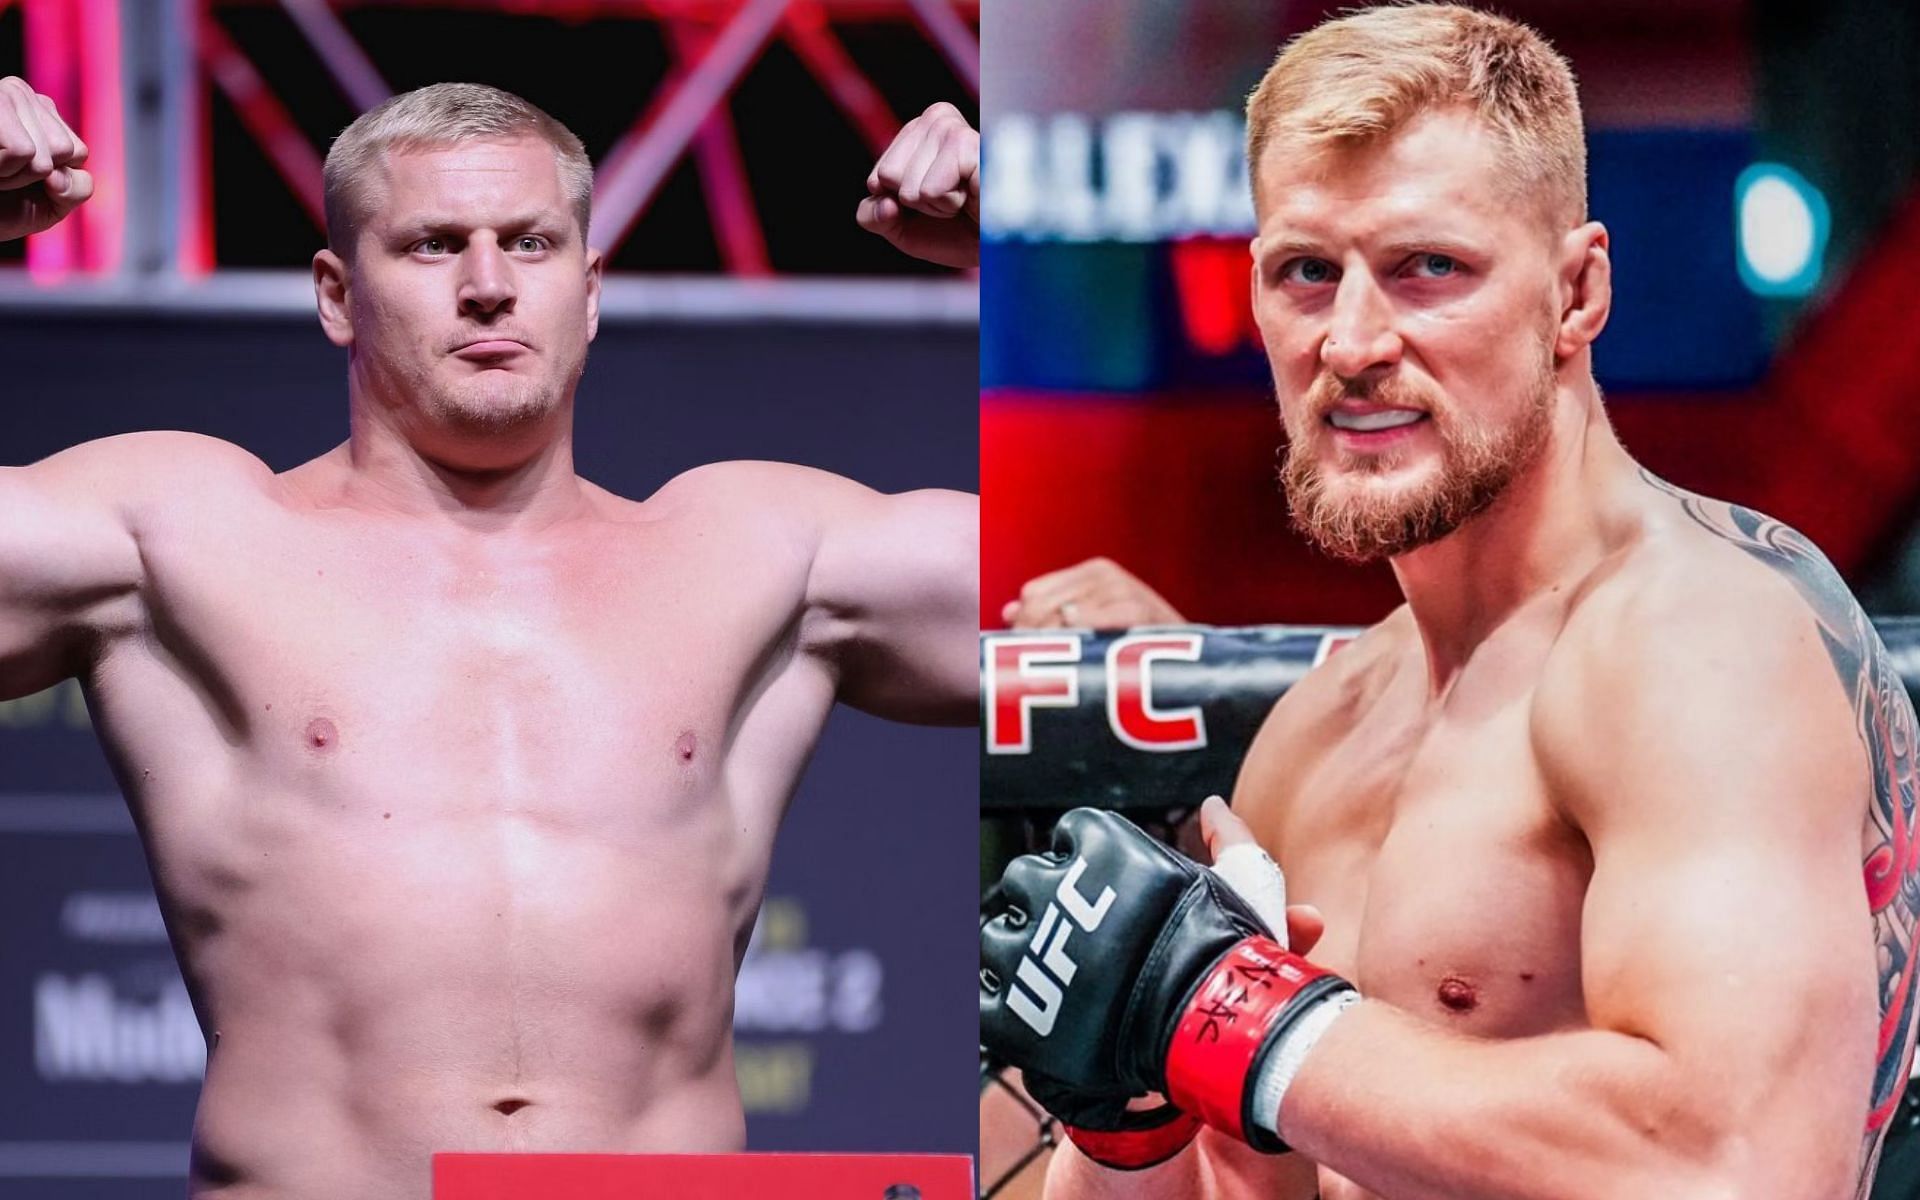 Sergei Pavlovich (left) and Alexander Volkov (right) did not know about their fight at UFC Saudi Arabia, according to reports [Images Courtesy: @GettyImages, @volkov_alex on Instagram]